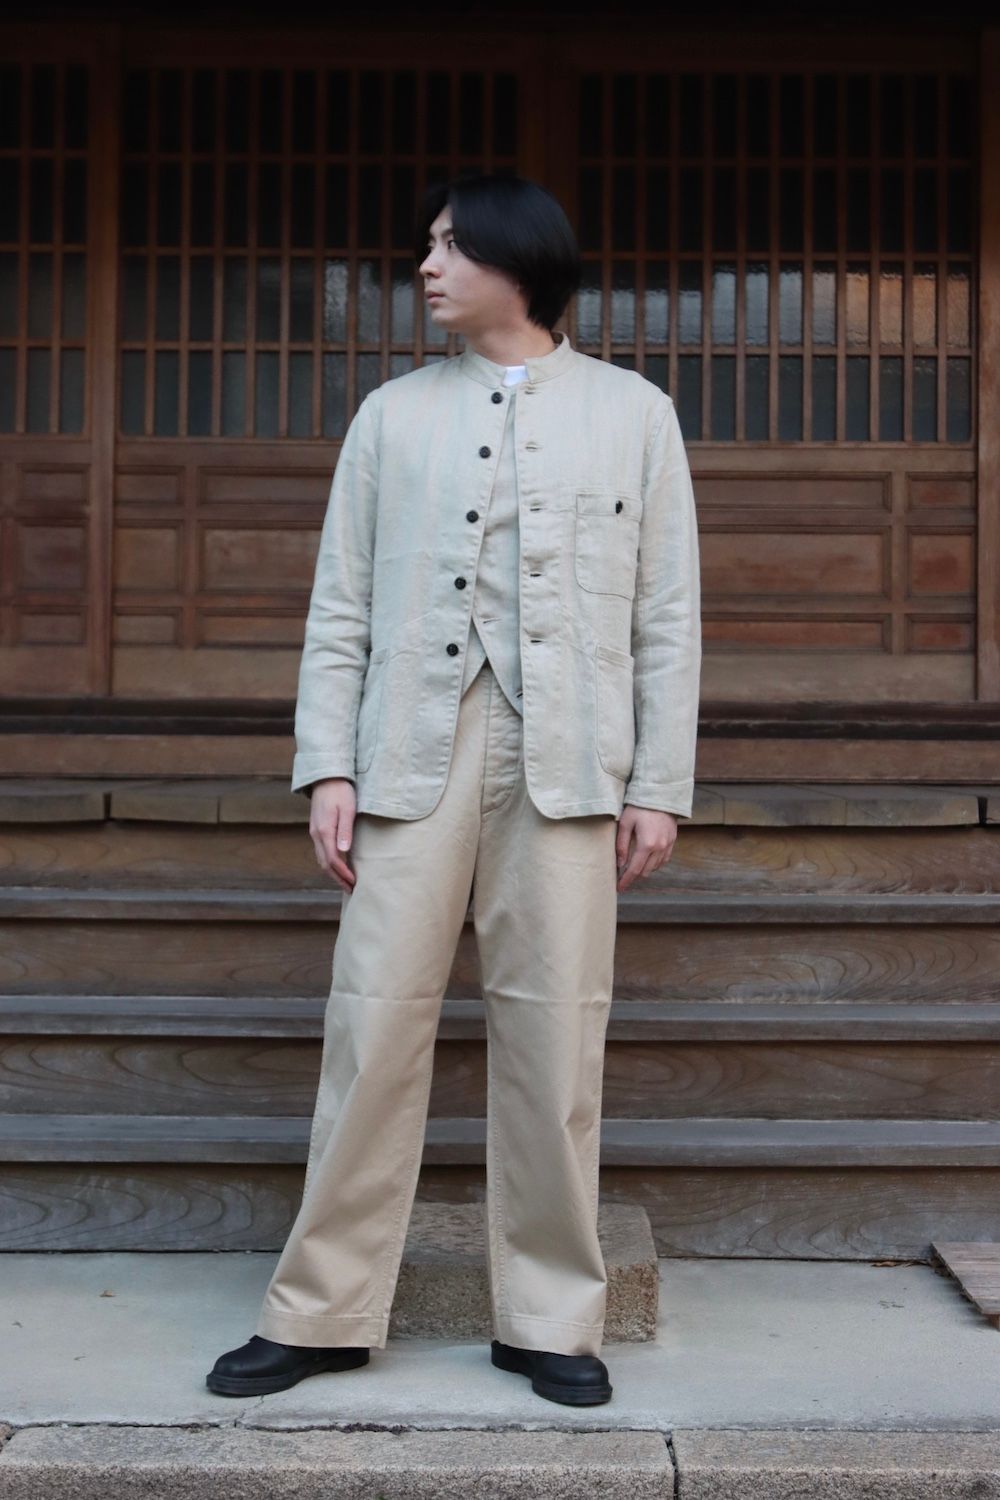 Ets.Materiaux French work jacket(22010300260010) style.2022.1.16 